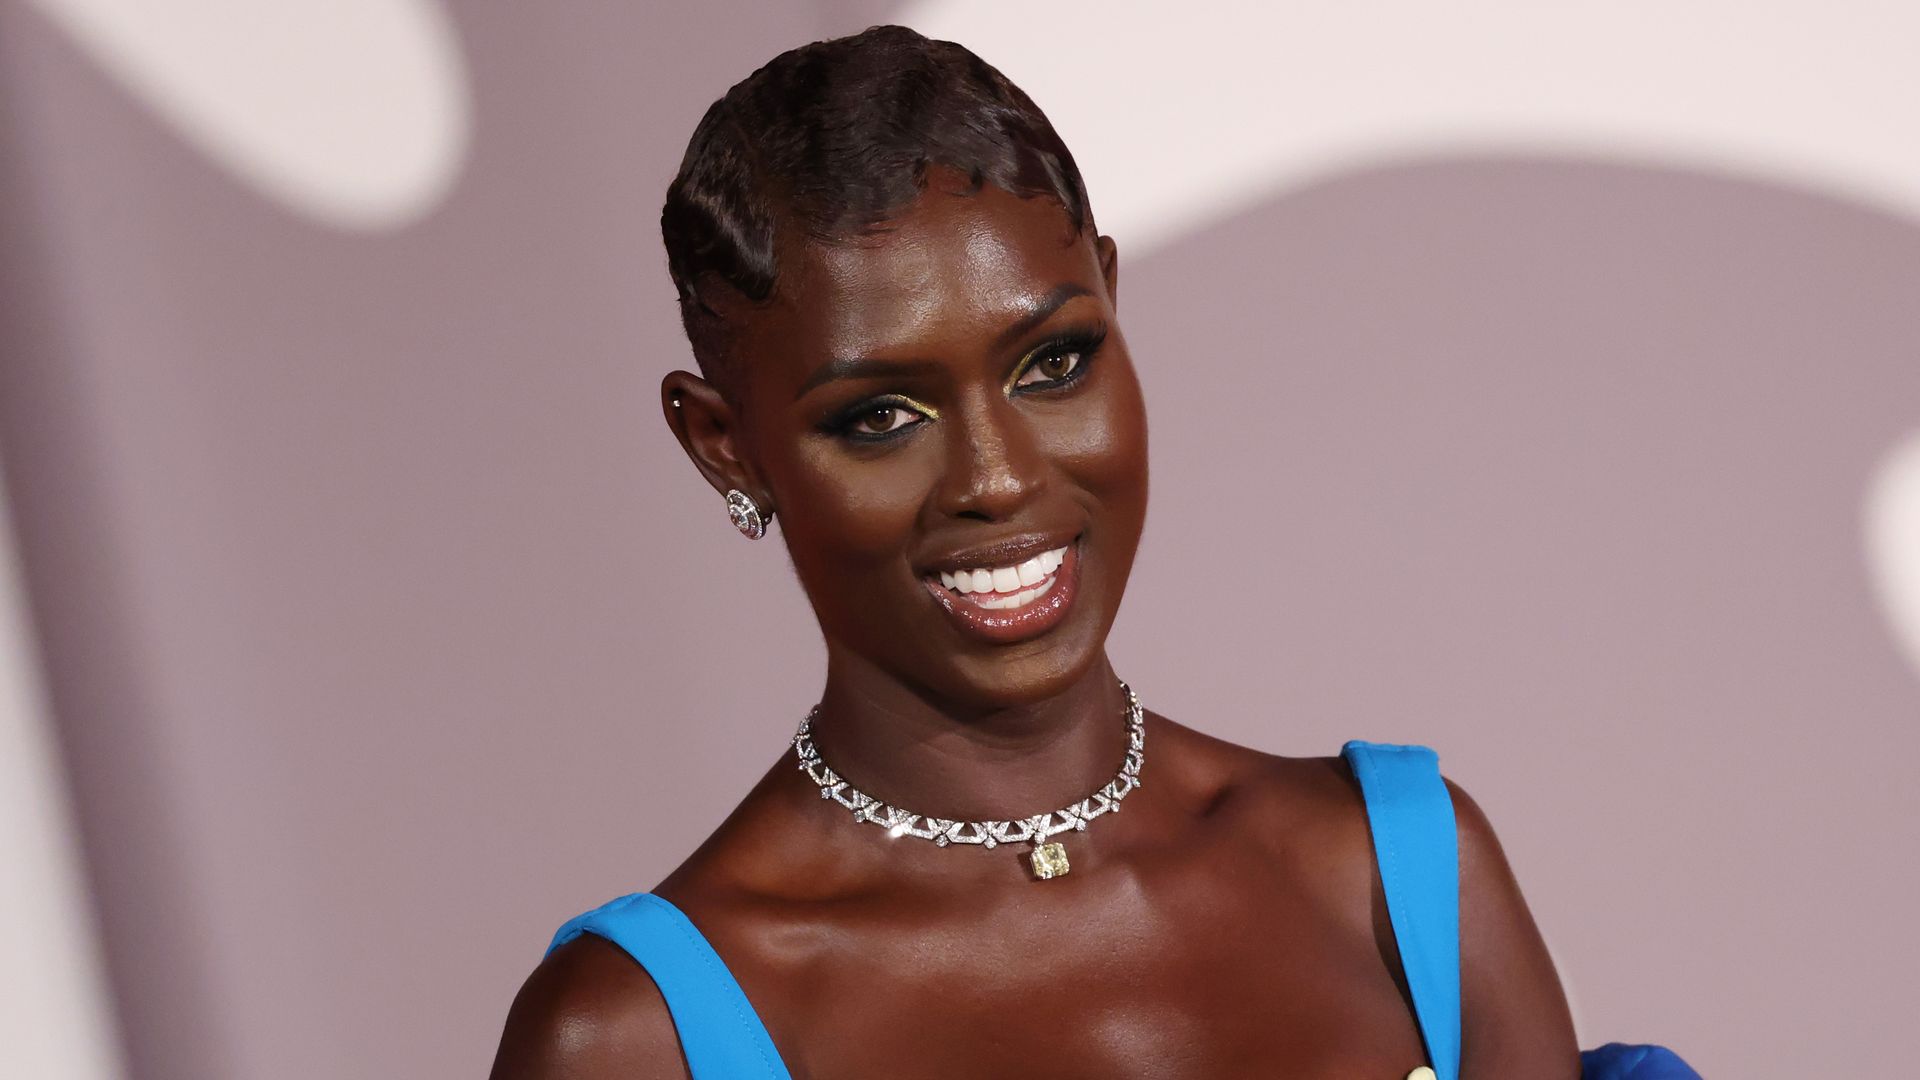 Jodie Turner-Smith attends "The Whale" & "Filming Italy Best Movie Achievement Award" red carpet at the 79th Venice International Film Festival on September 04, 2022 in Venice, Italy.